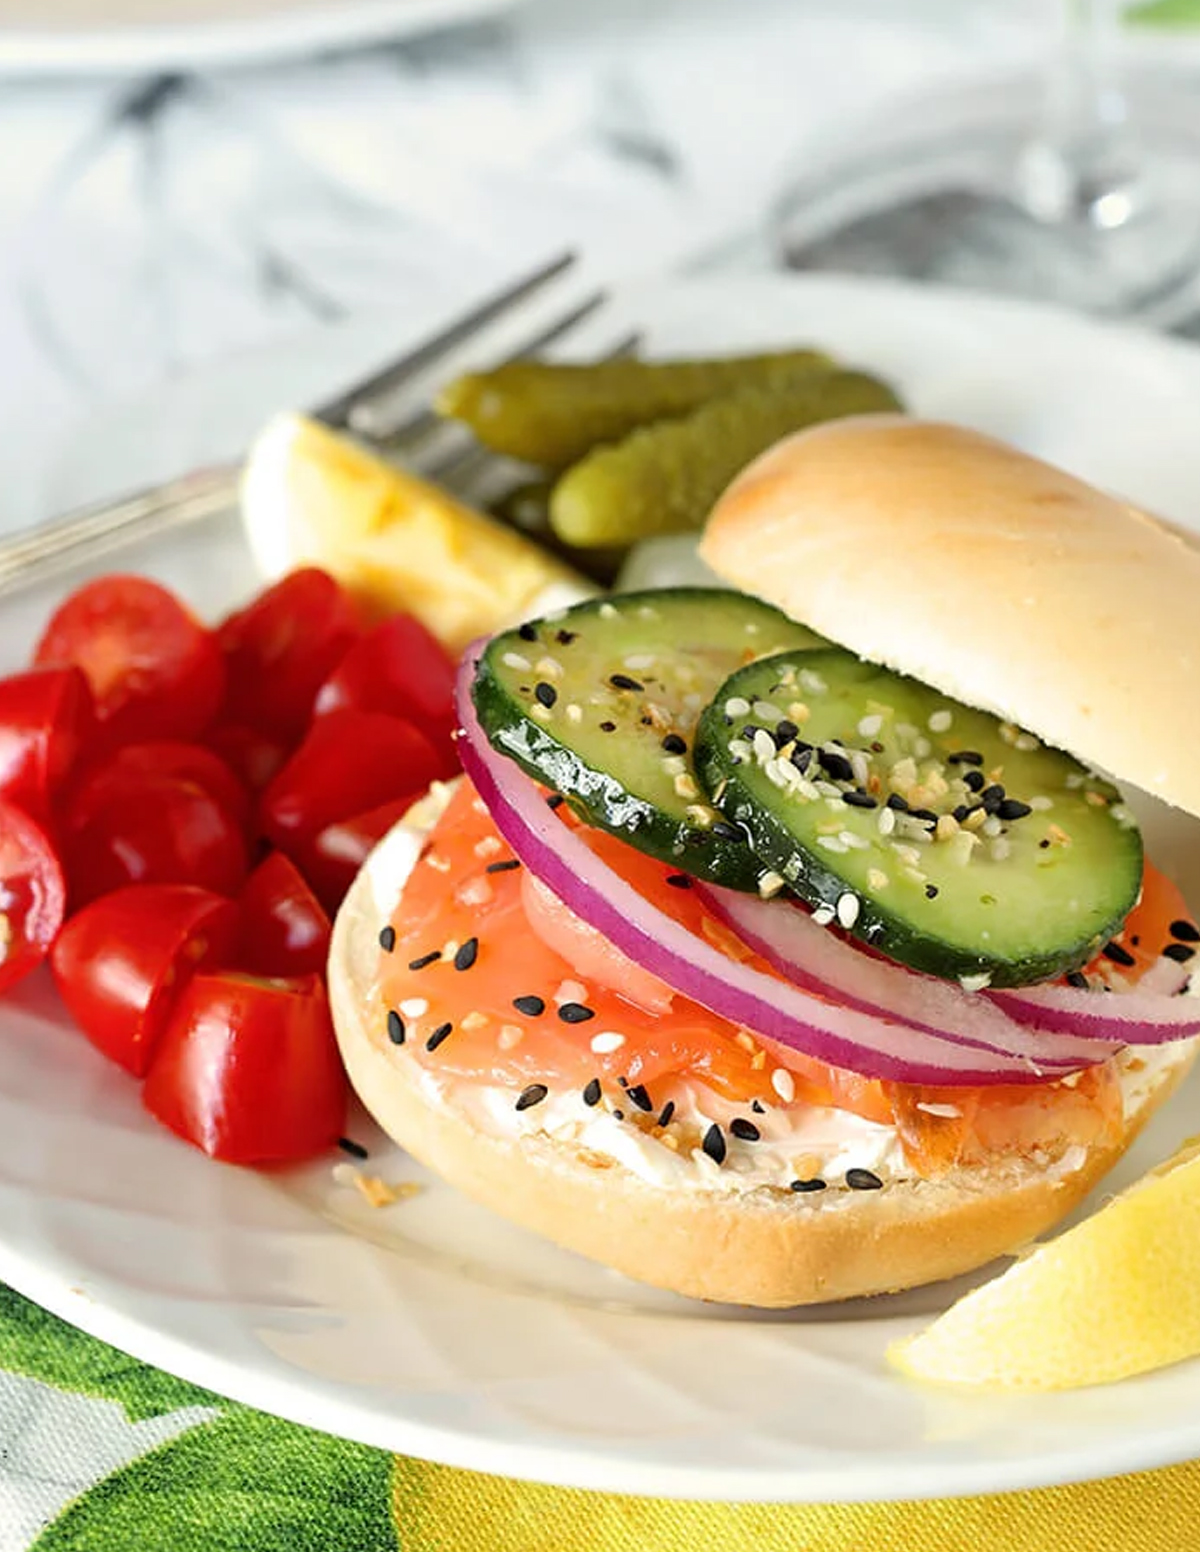 Creative Culinary bagel board is filled with cream cheese, salmon, pickles, onions, tomatoes, and bagels.